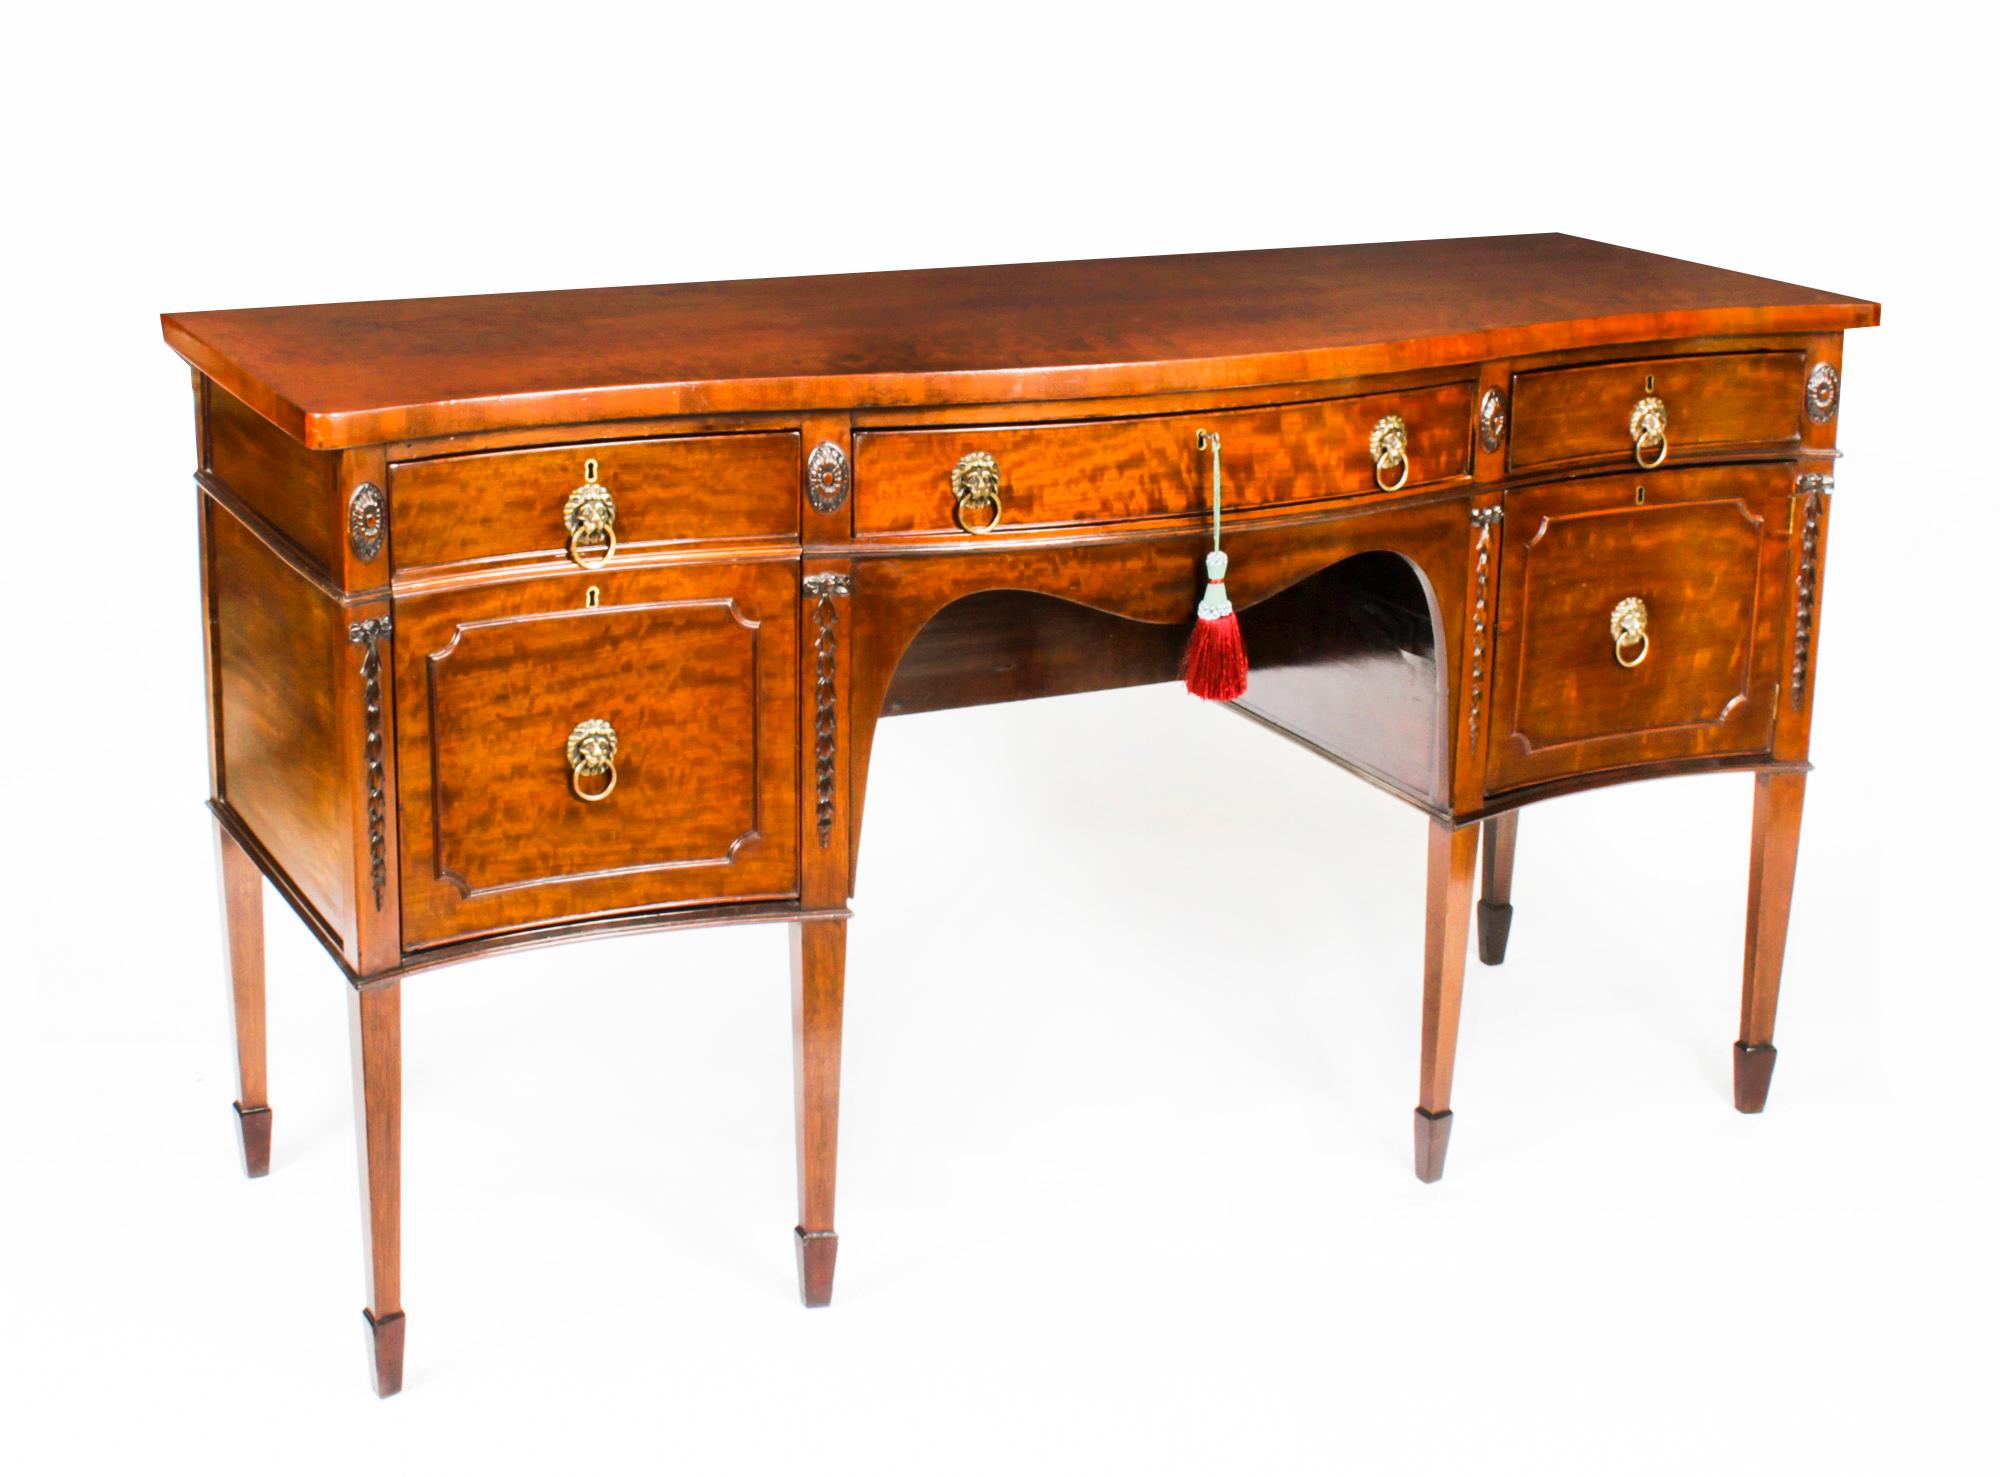 Antique George III Flame Mahogany Serpentine Sideboard, 19th Century For Sale 14